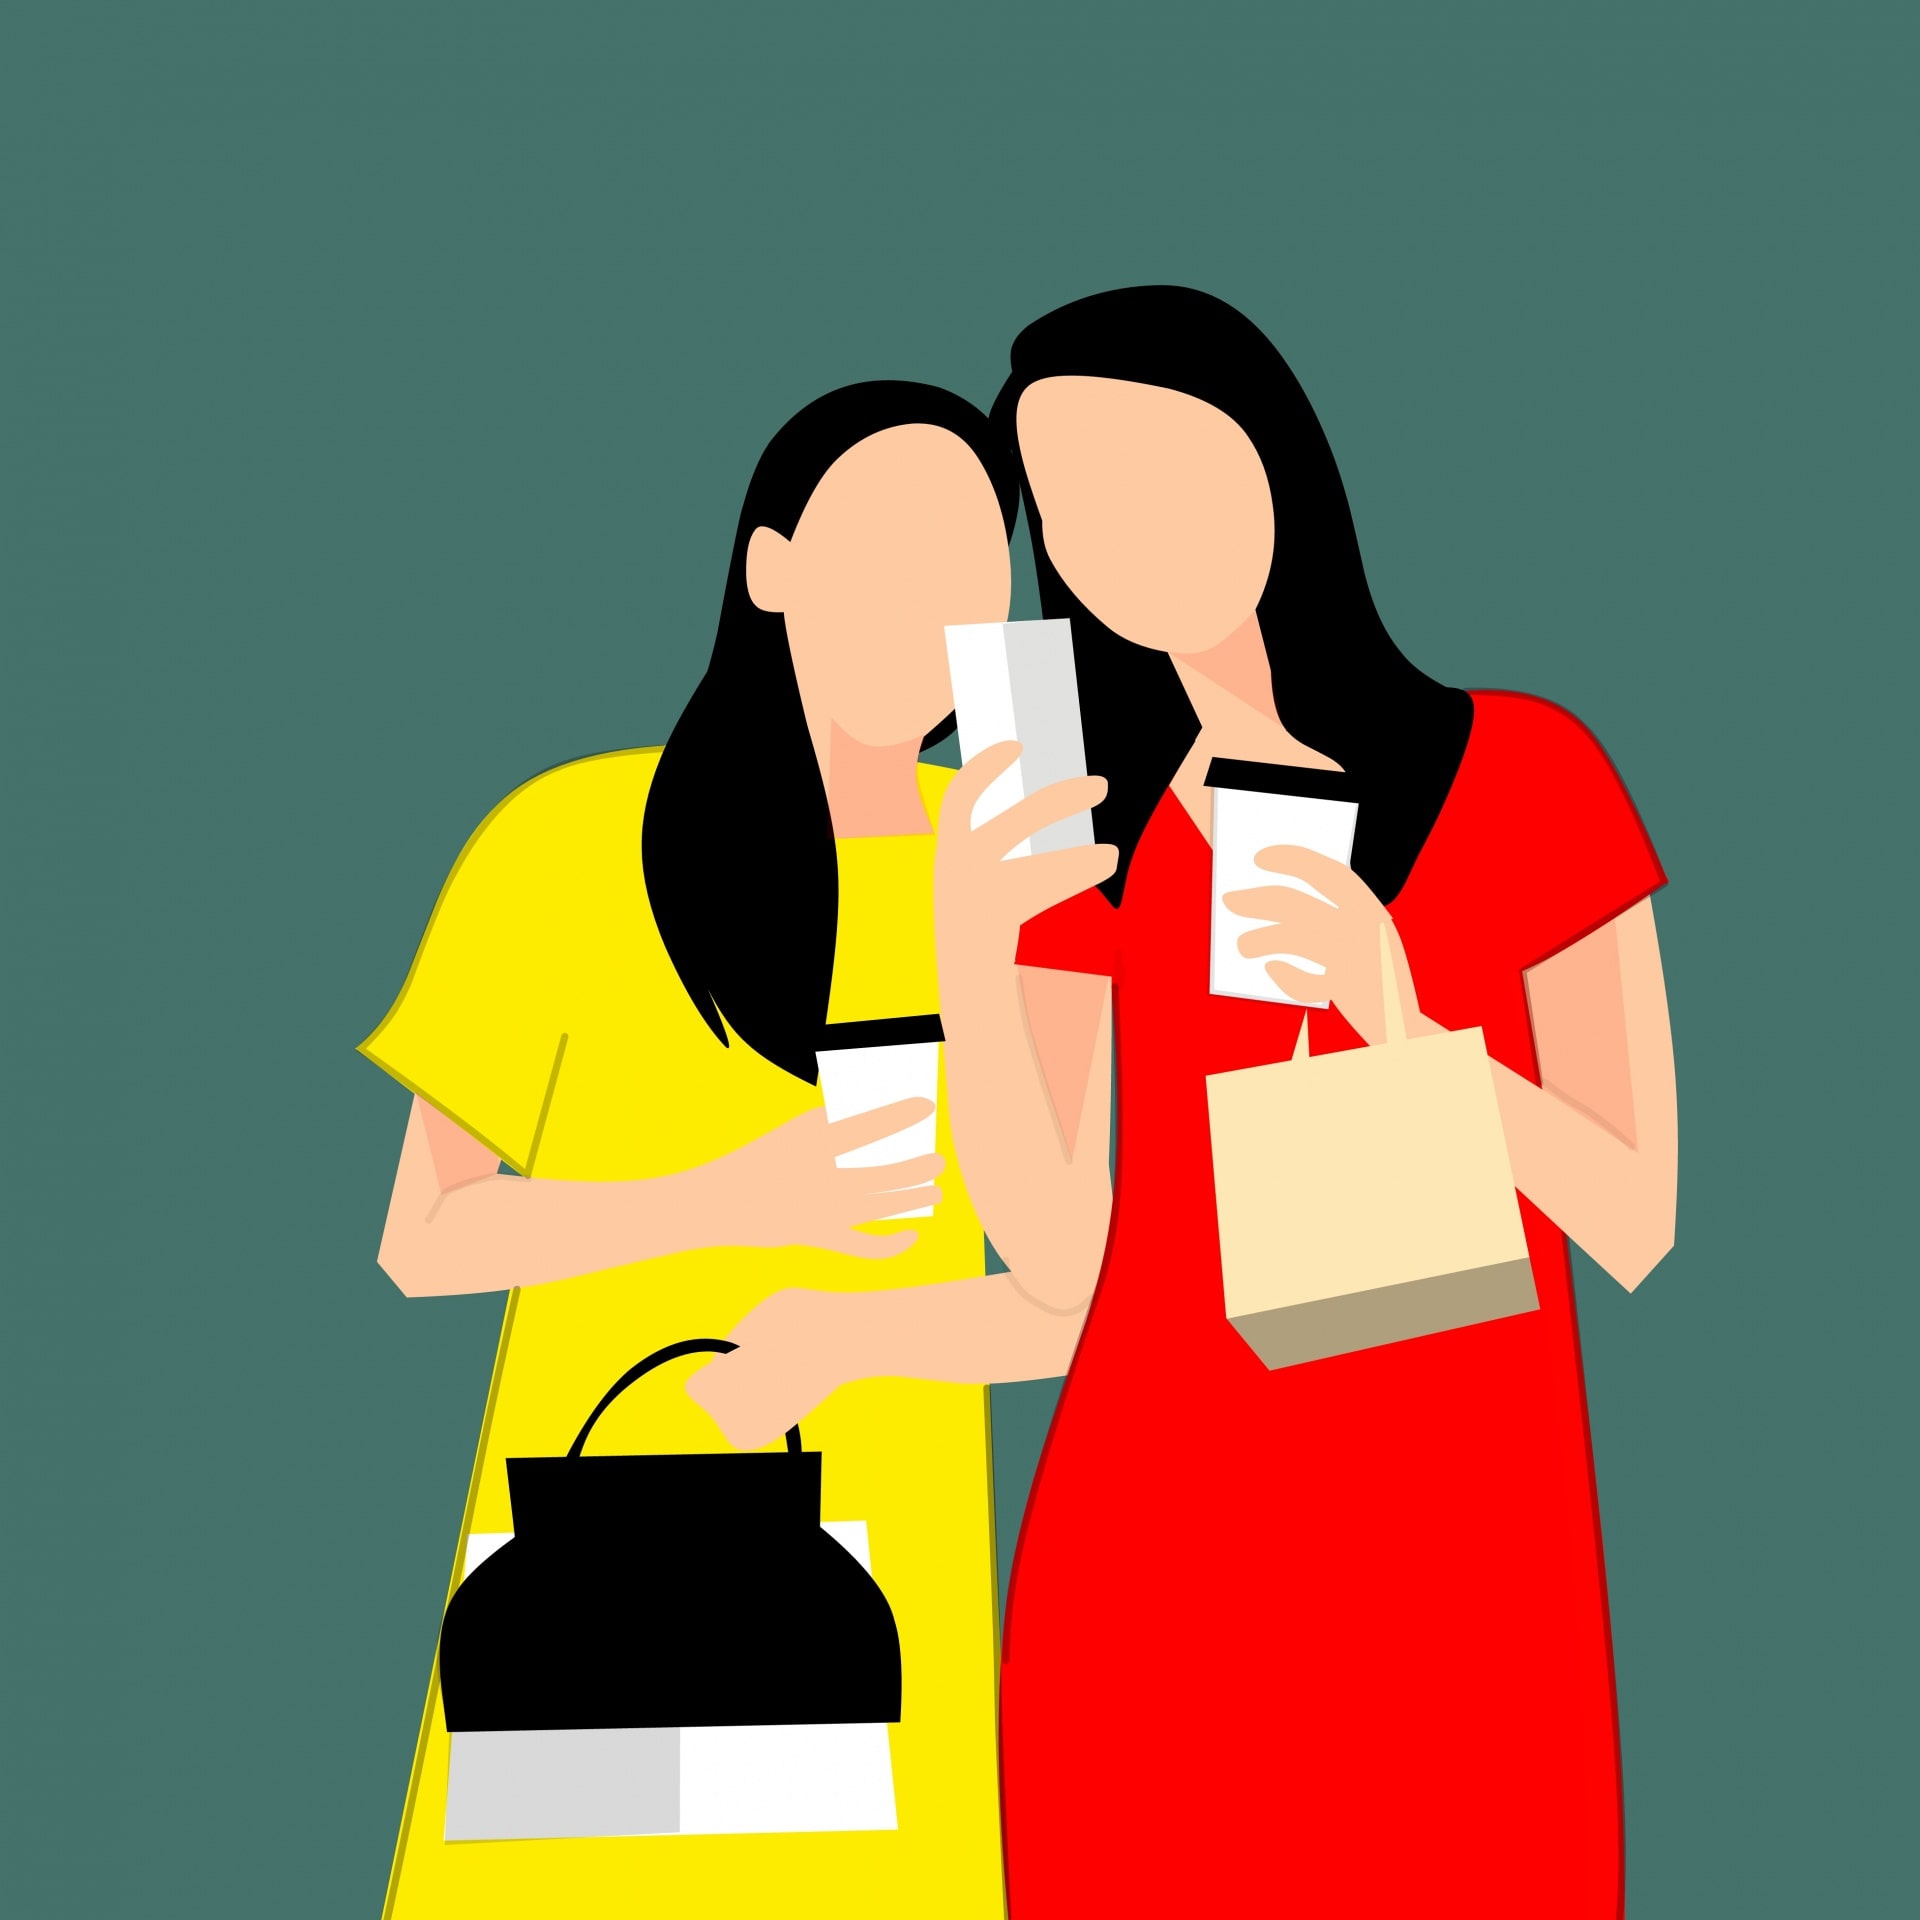 Two women looking at a cellphone.